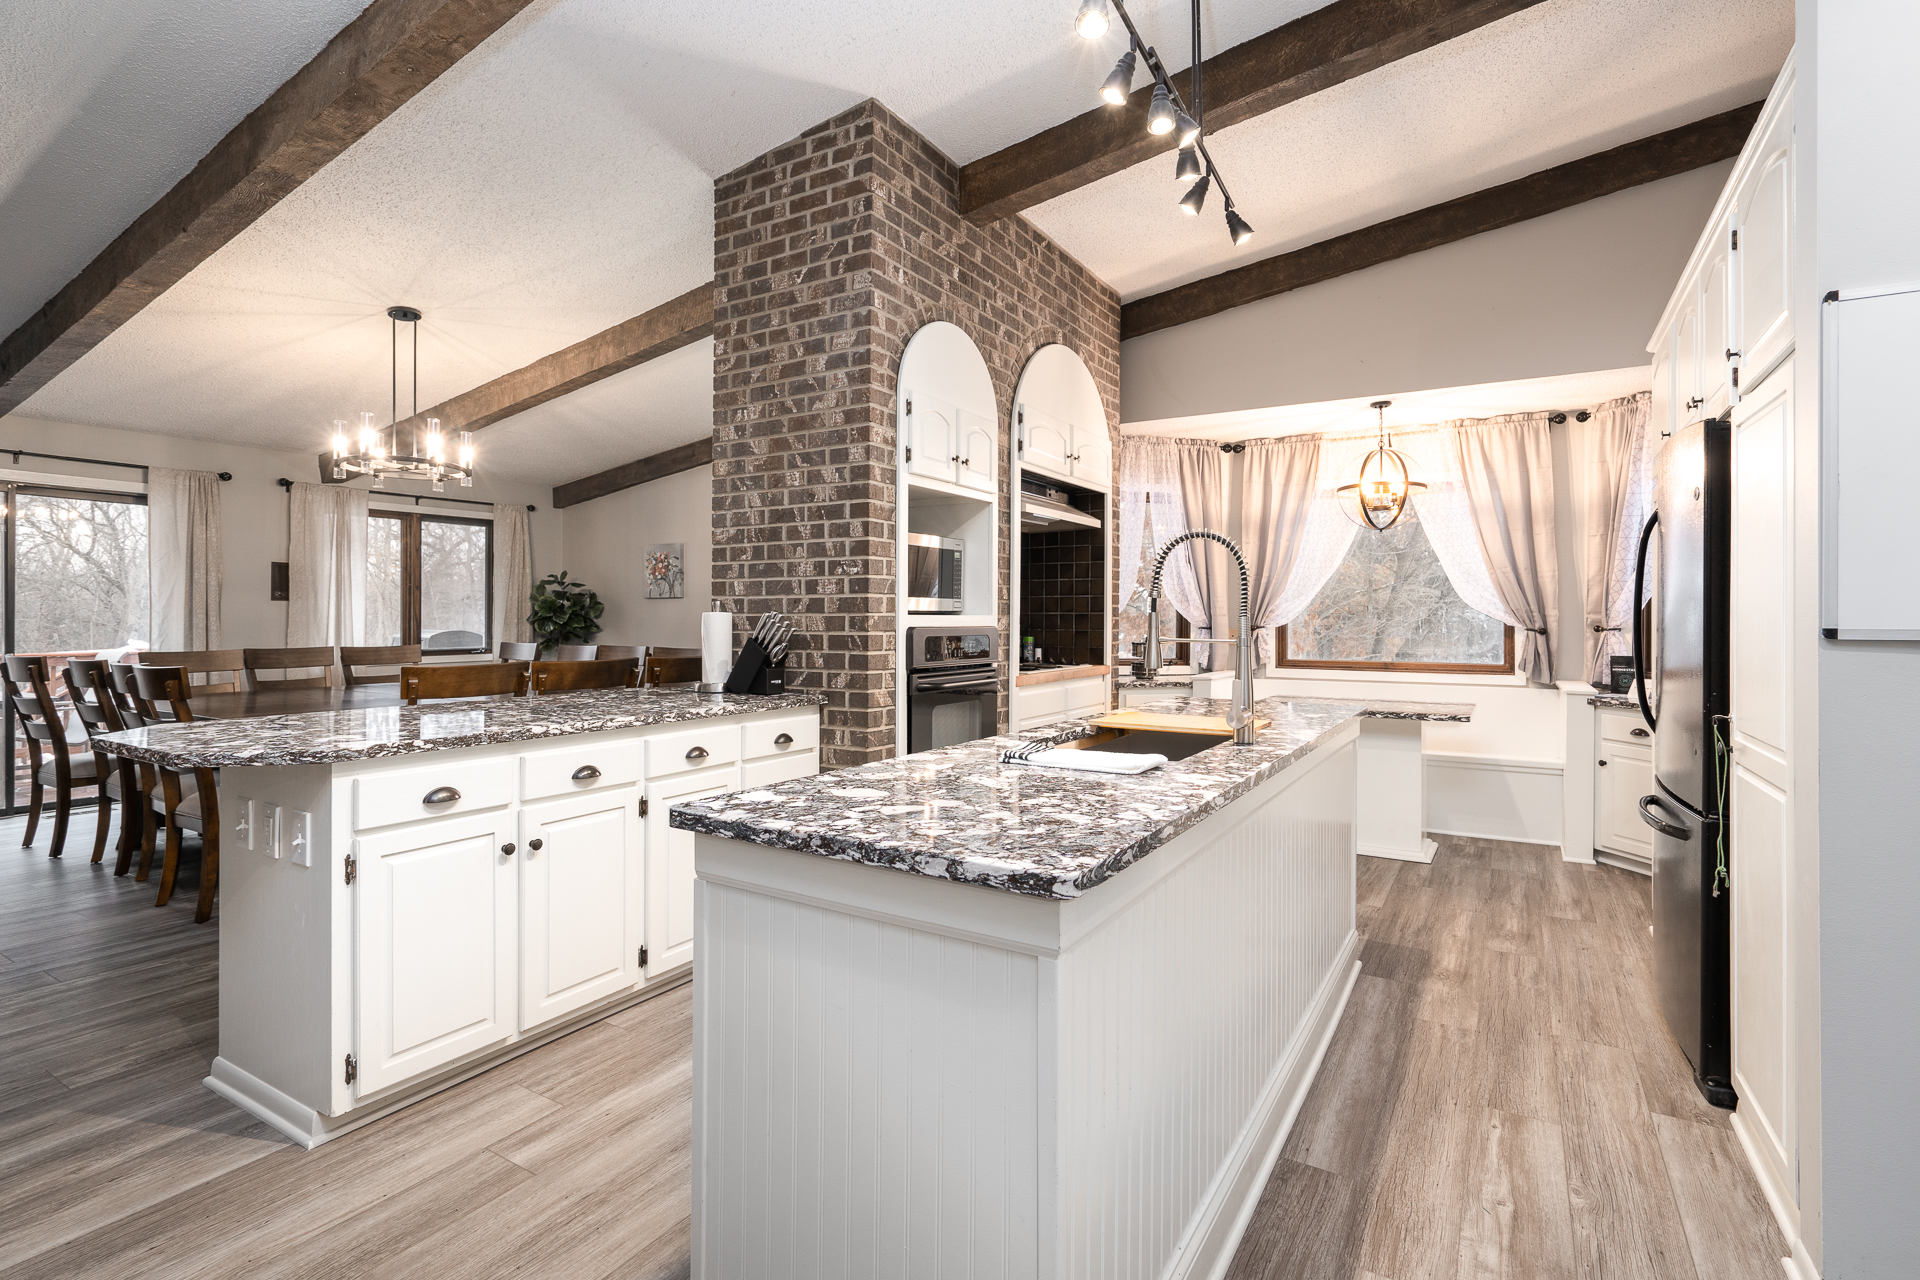 Stunning kitchen with breakfast nook and seating